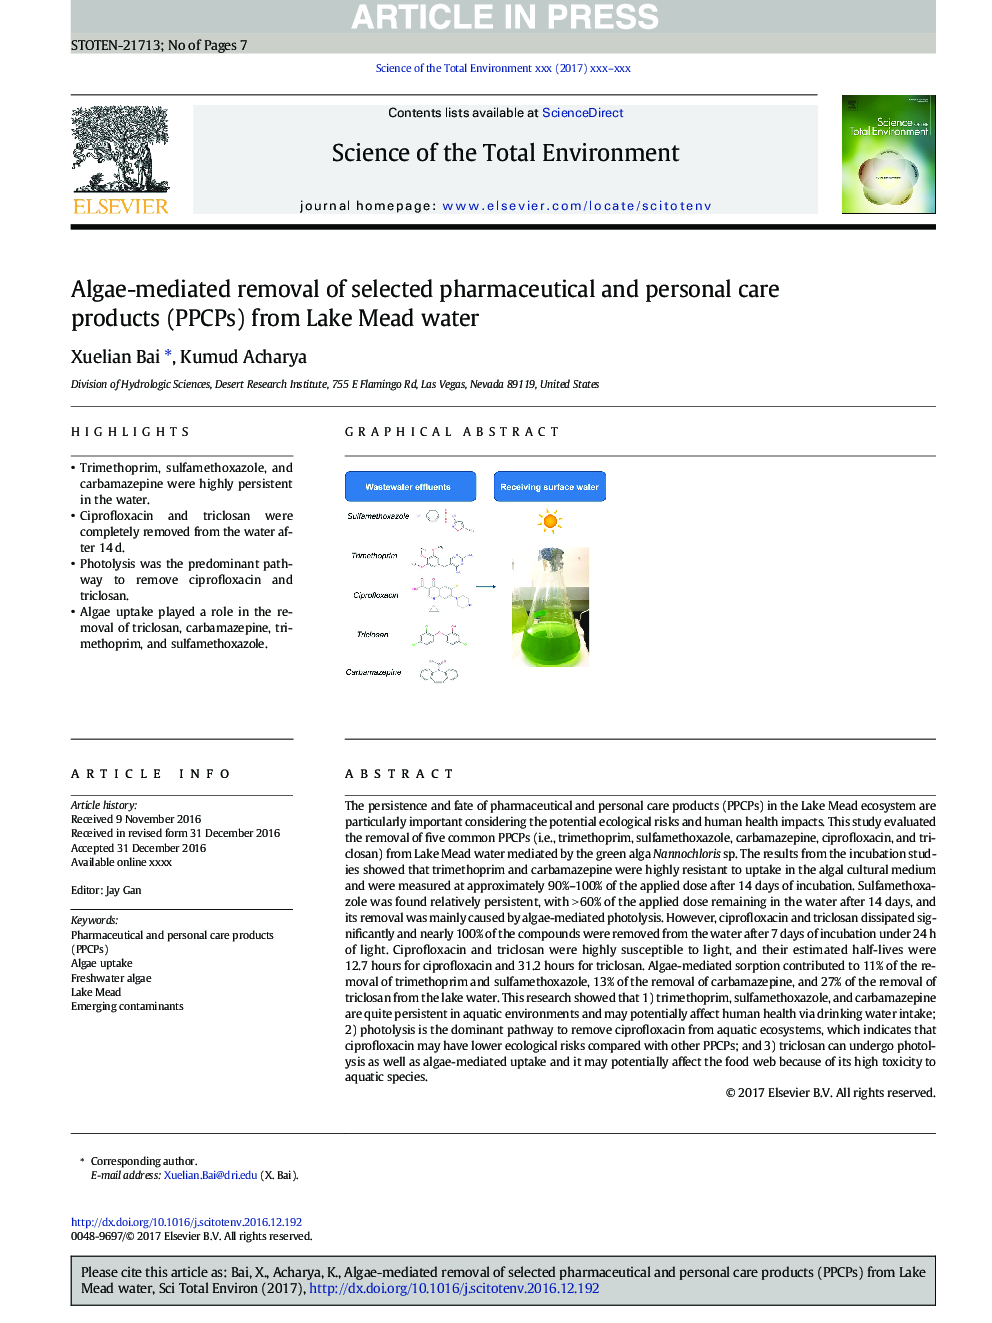 Algae-mediated removal of selected pharmaceutical and personal care products (PPCPs) from Lake Mead water